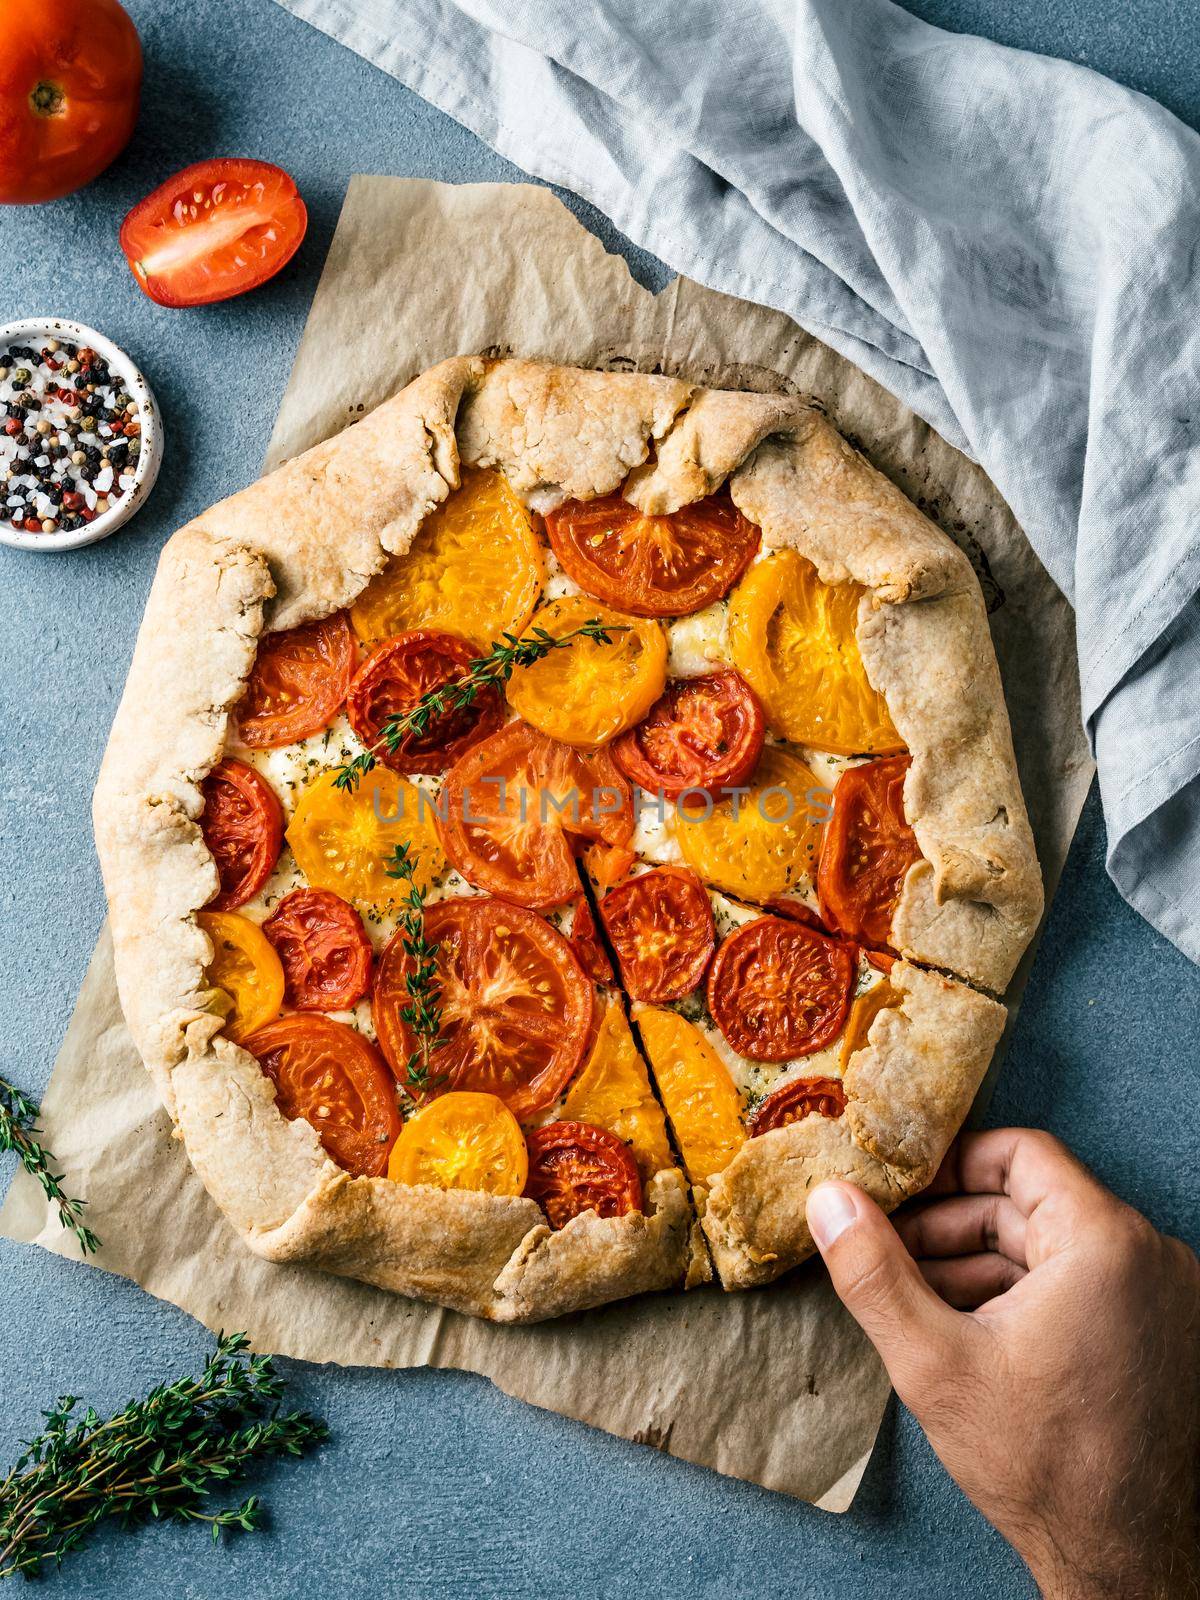 tomatoes and cheese tart or galette by fascinadora